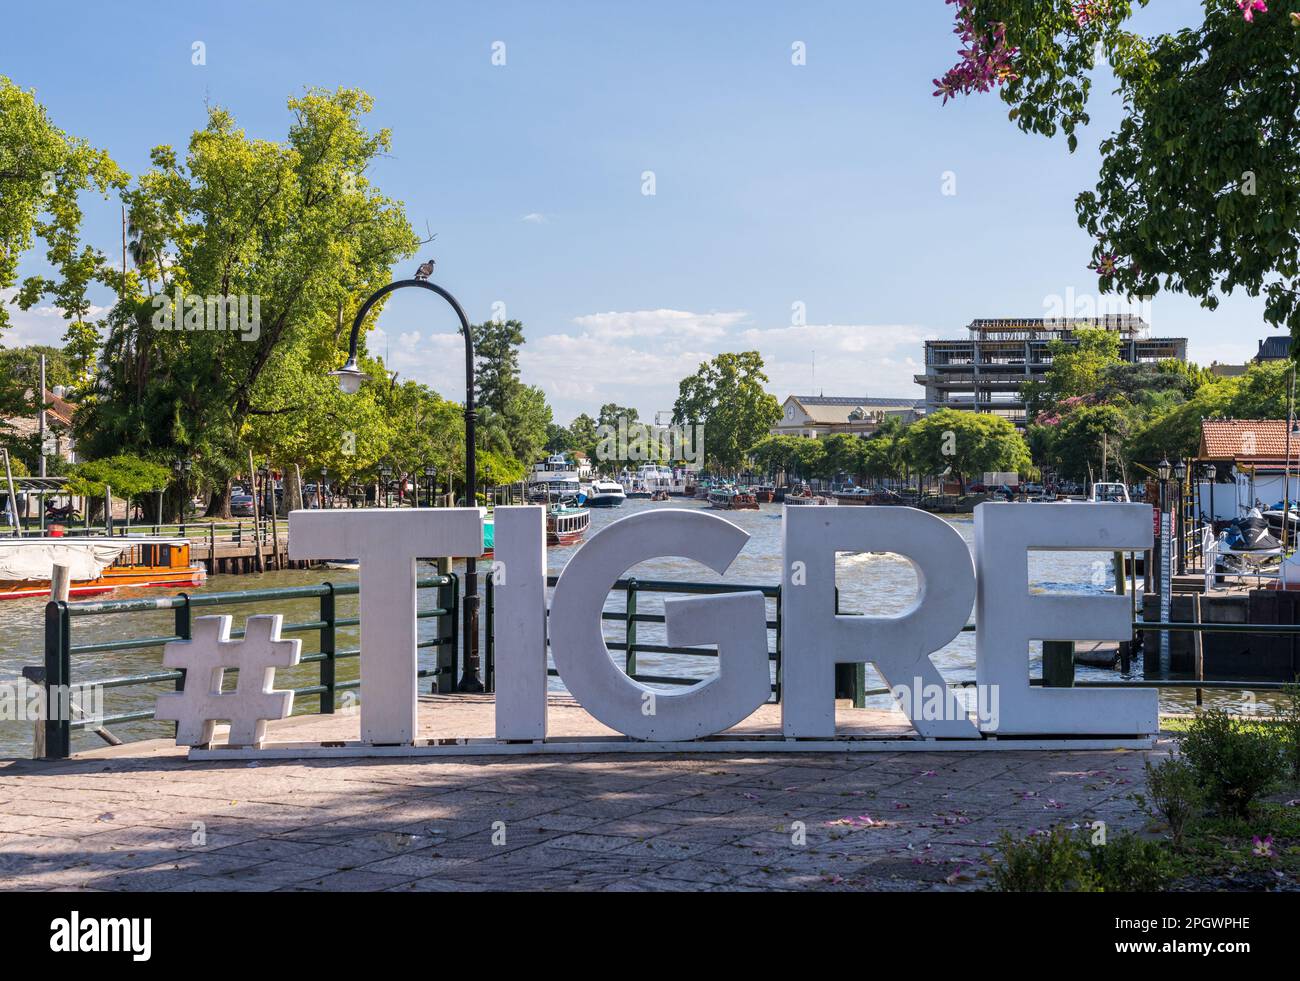 Tigre, Argentina - 7 February 2023: Town sign in the boat tour port area of Tigre on the Parana Delta Stock Photo